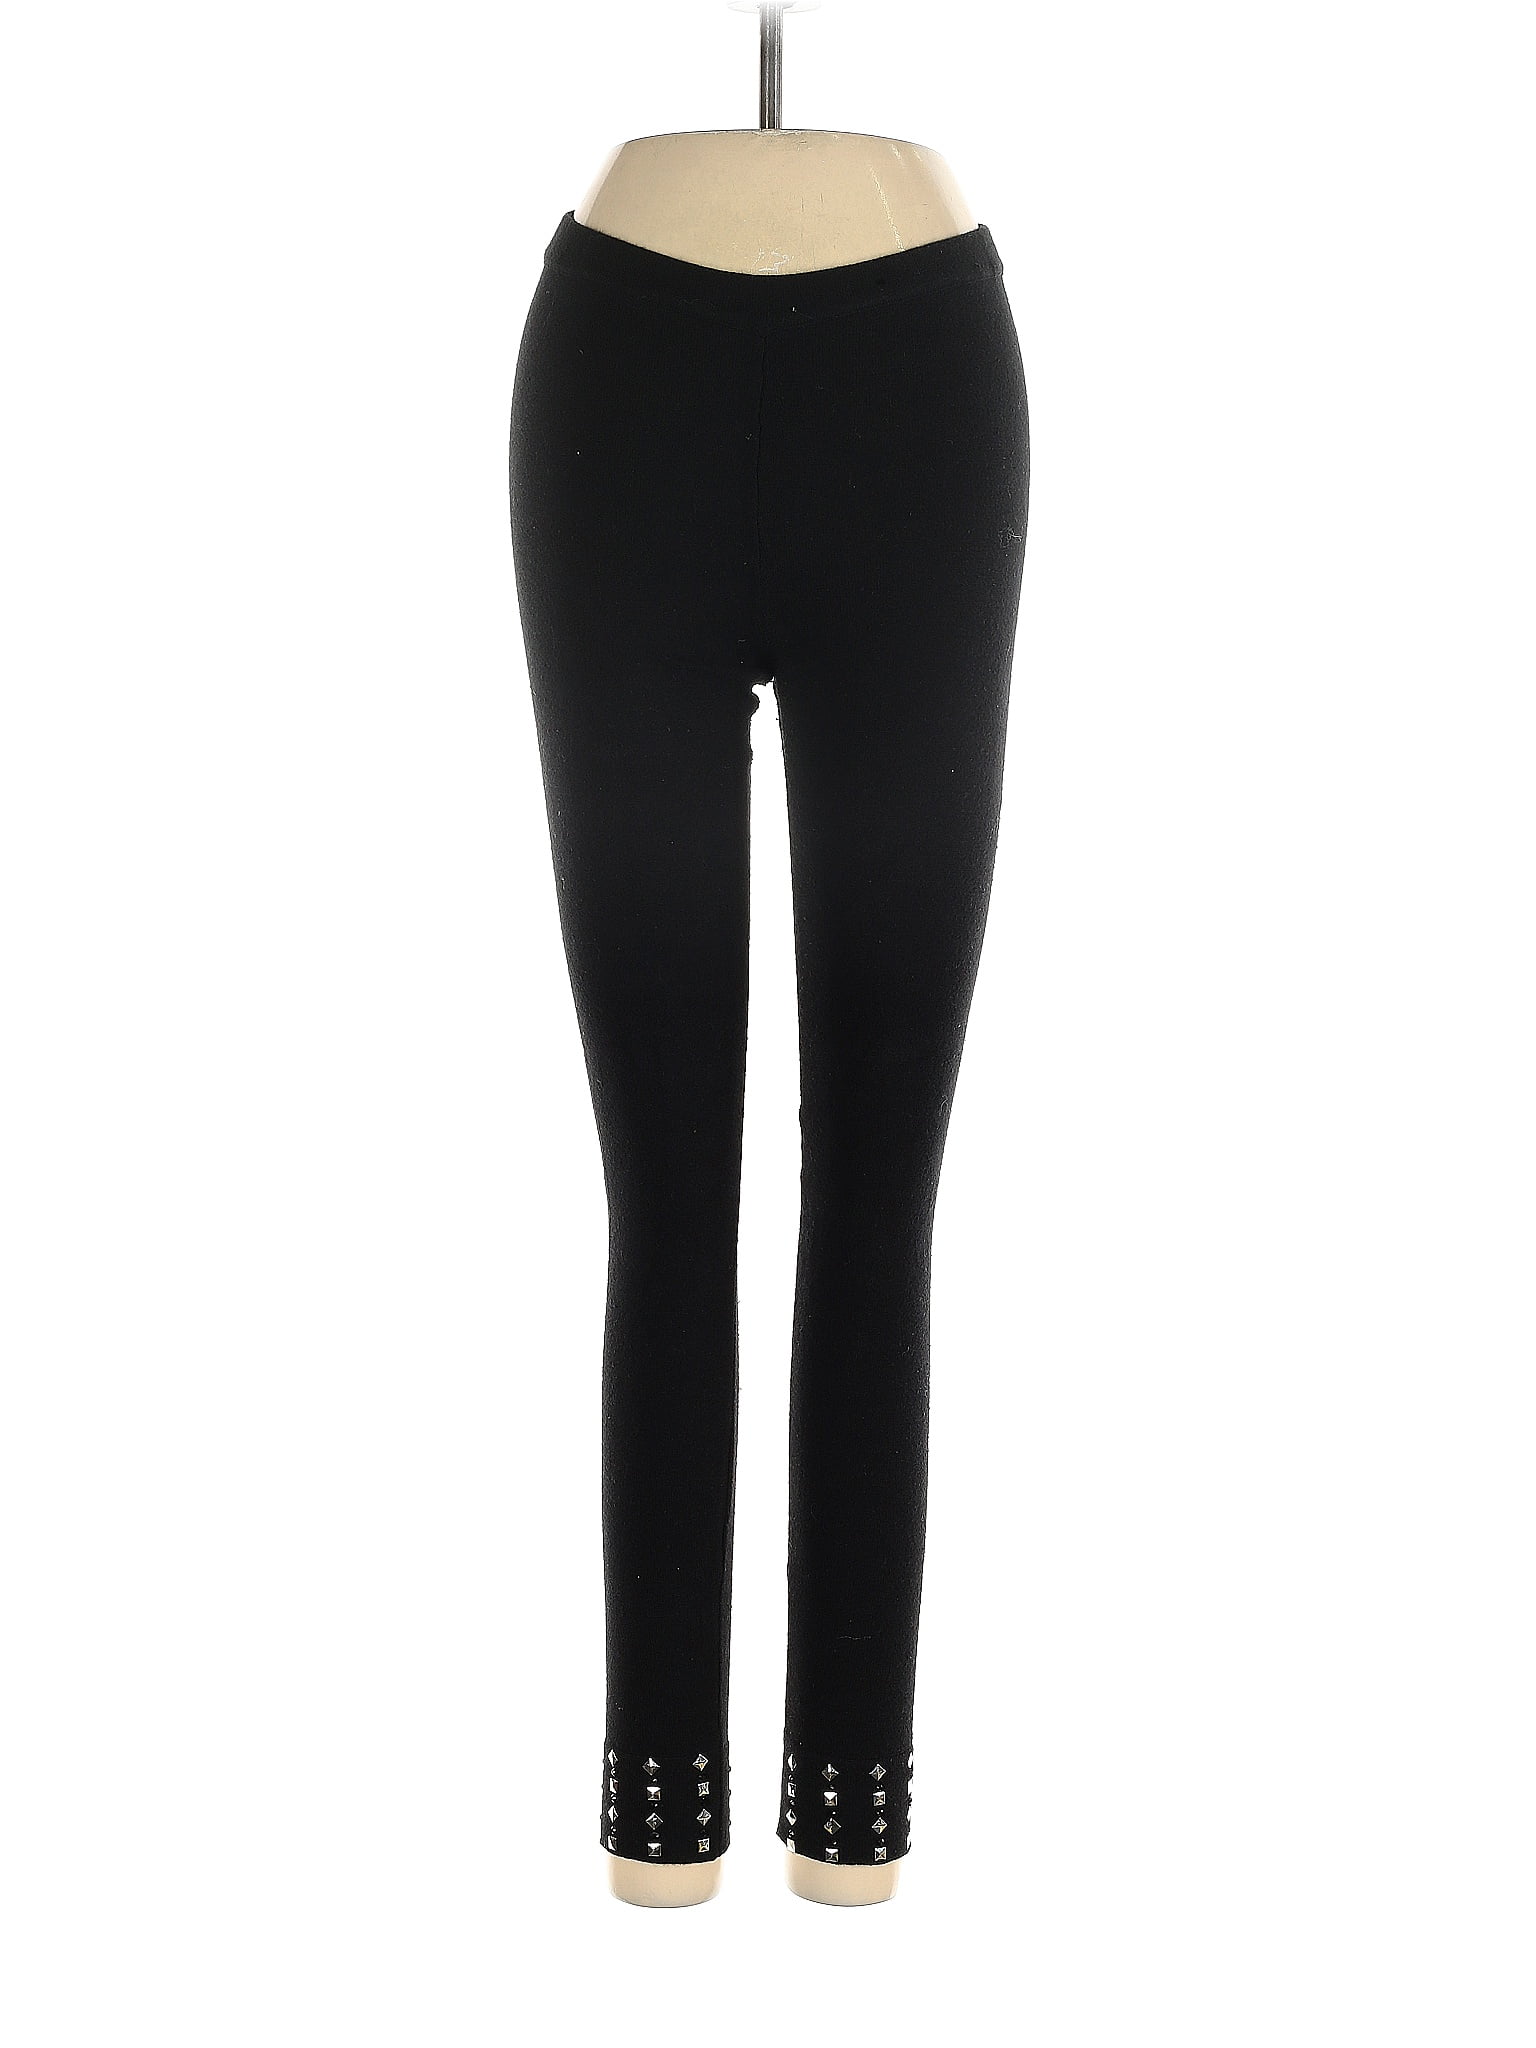 Aeropostale Leggings Black Size XS - $6 (70% Off Retail) - From